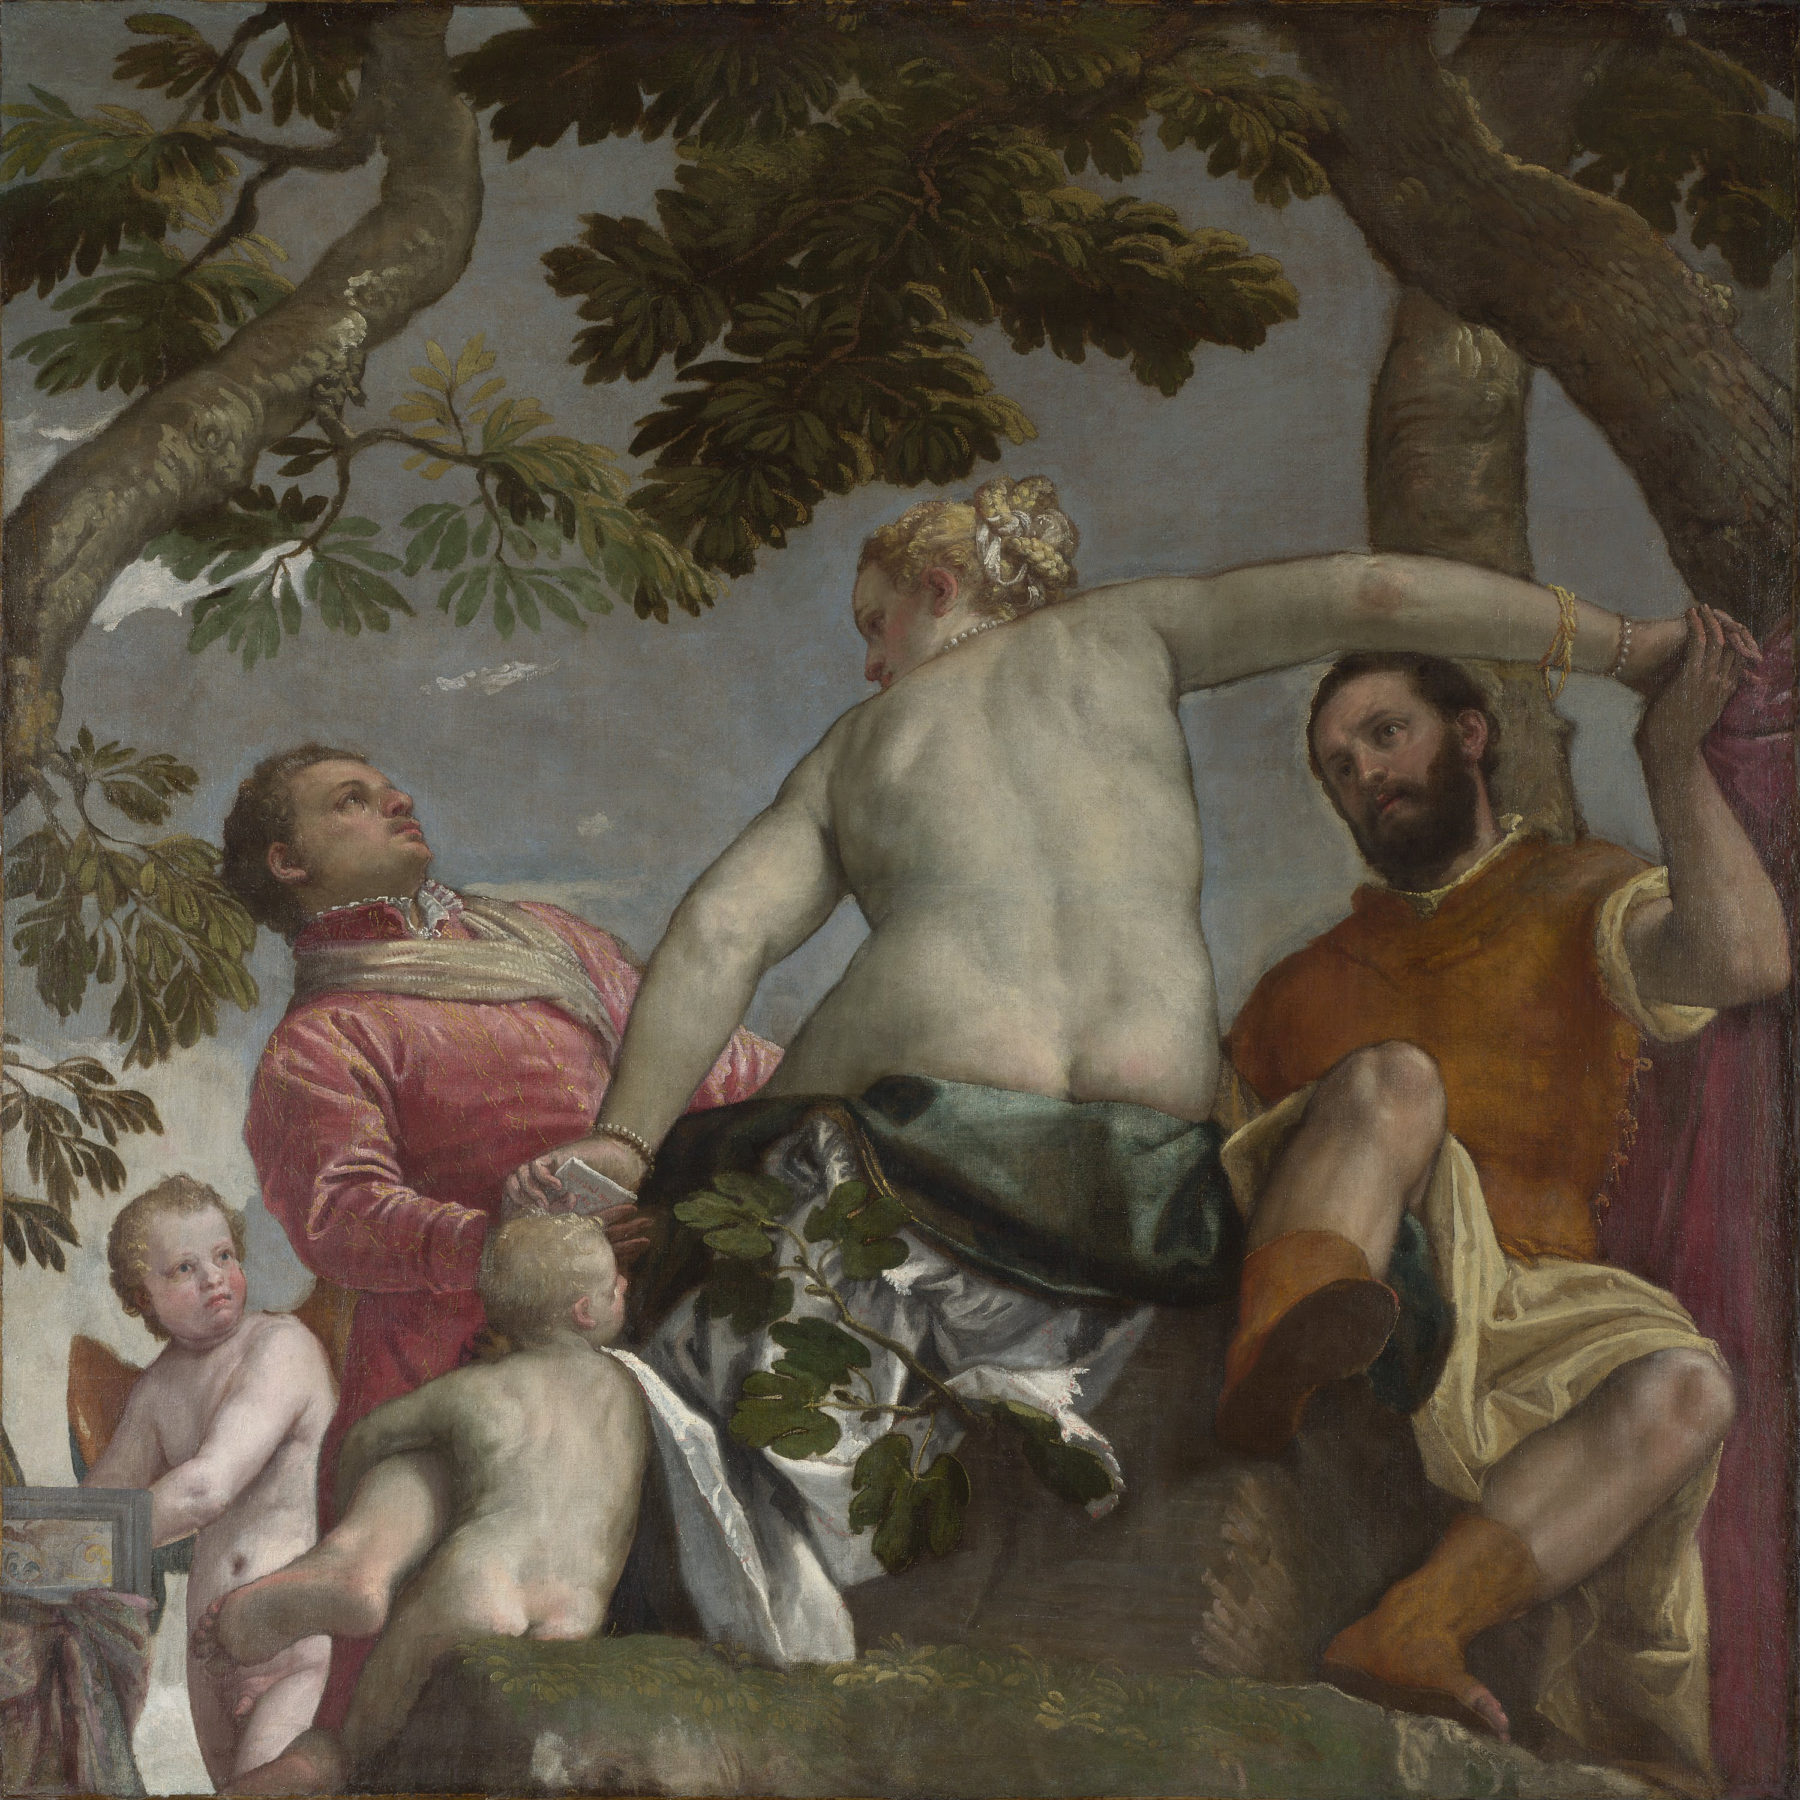 Paolo Veronese, Infidelity, c. 1570-75. Oil on canvas, 189.9 x 189.9 cm (74 3/4 x 74 3/4 in.). National Gallery, London.